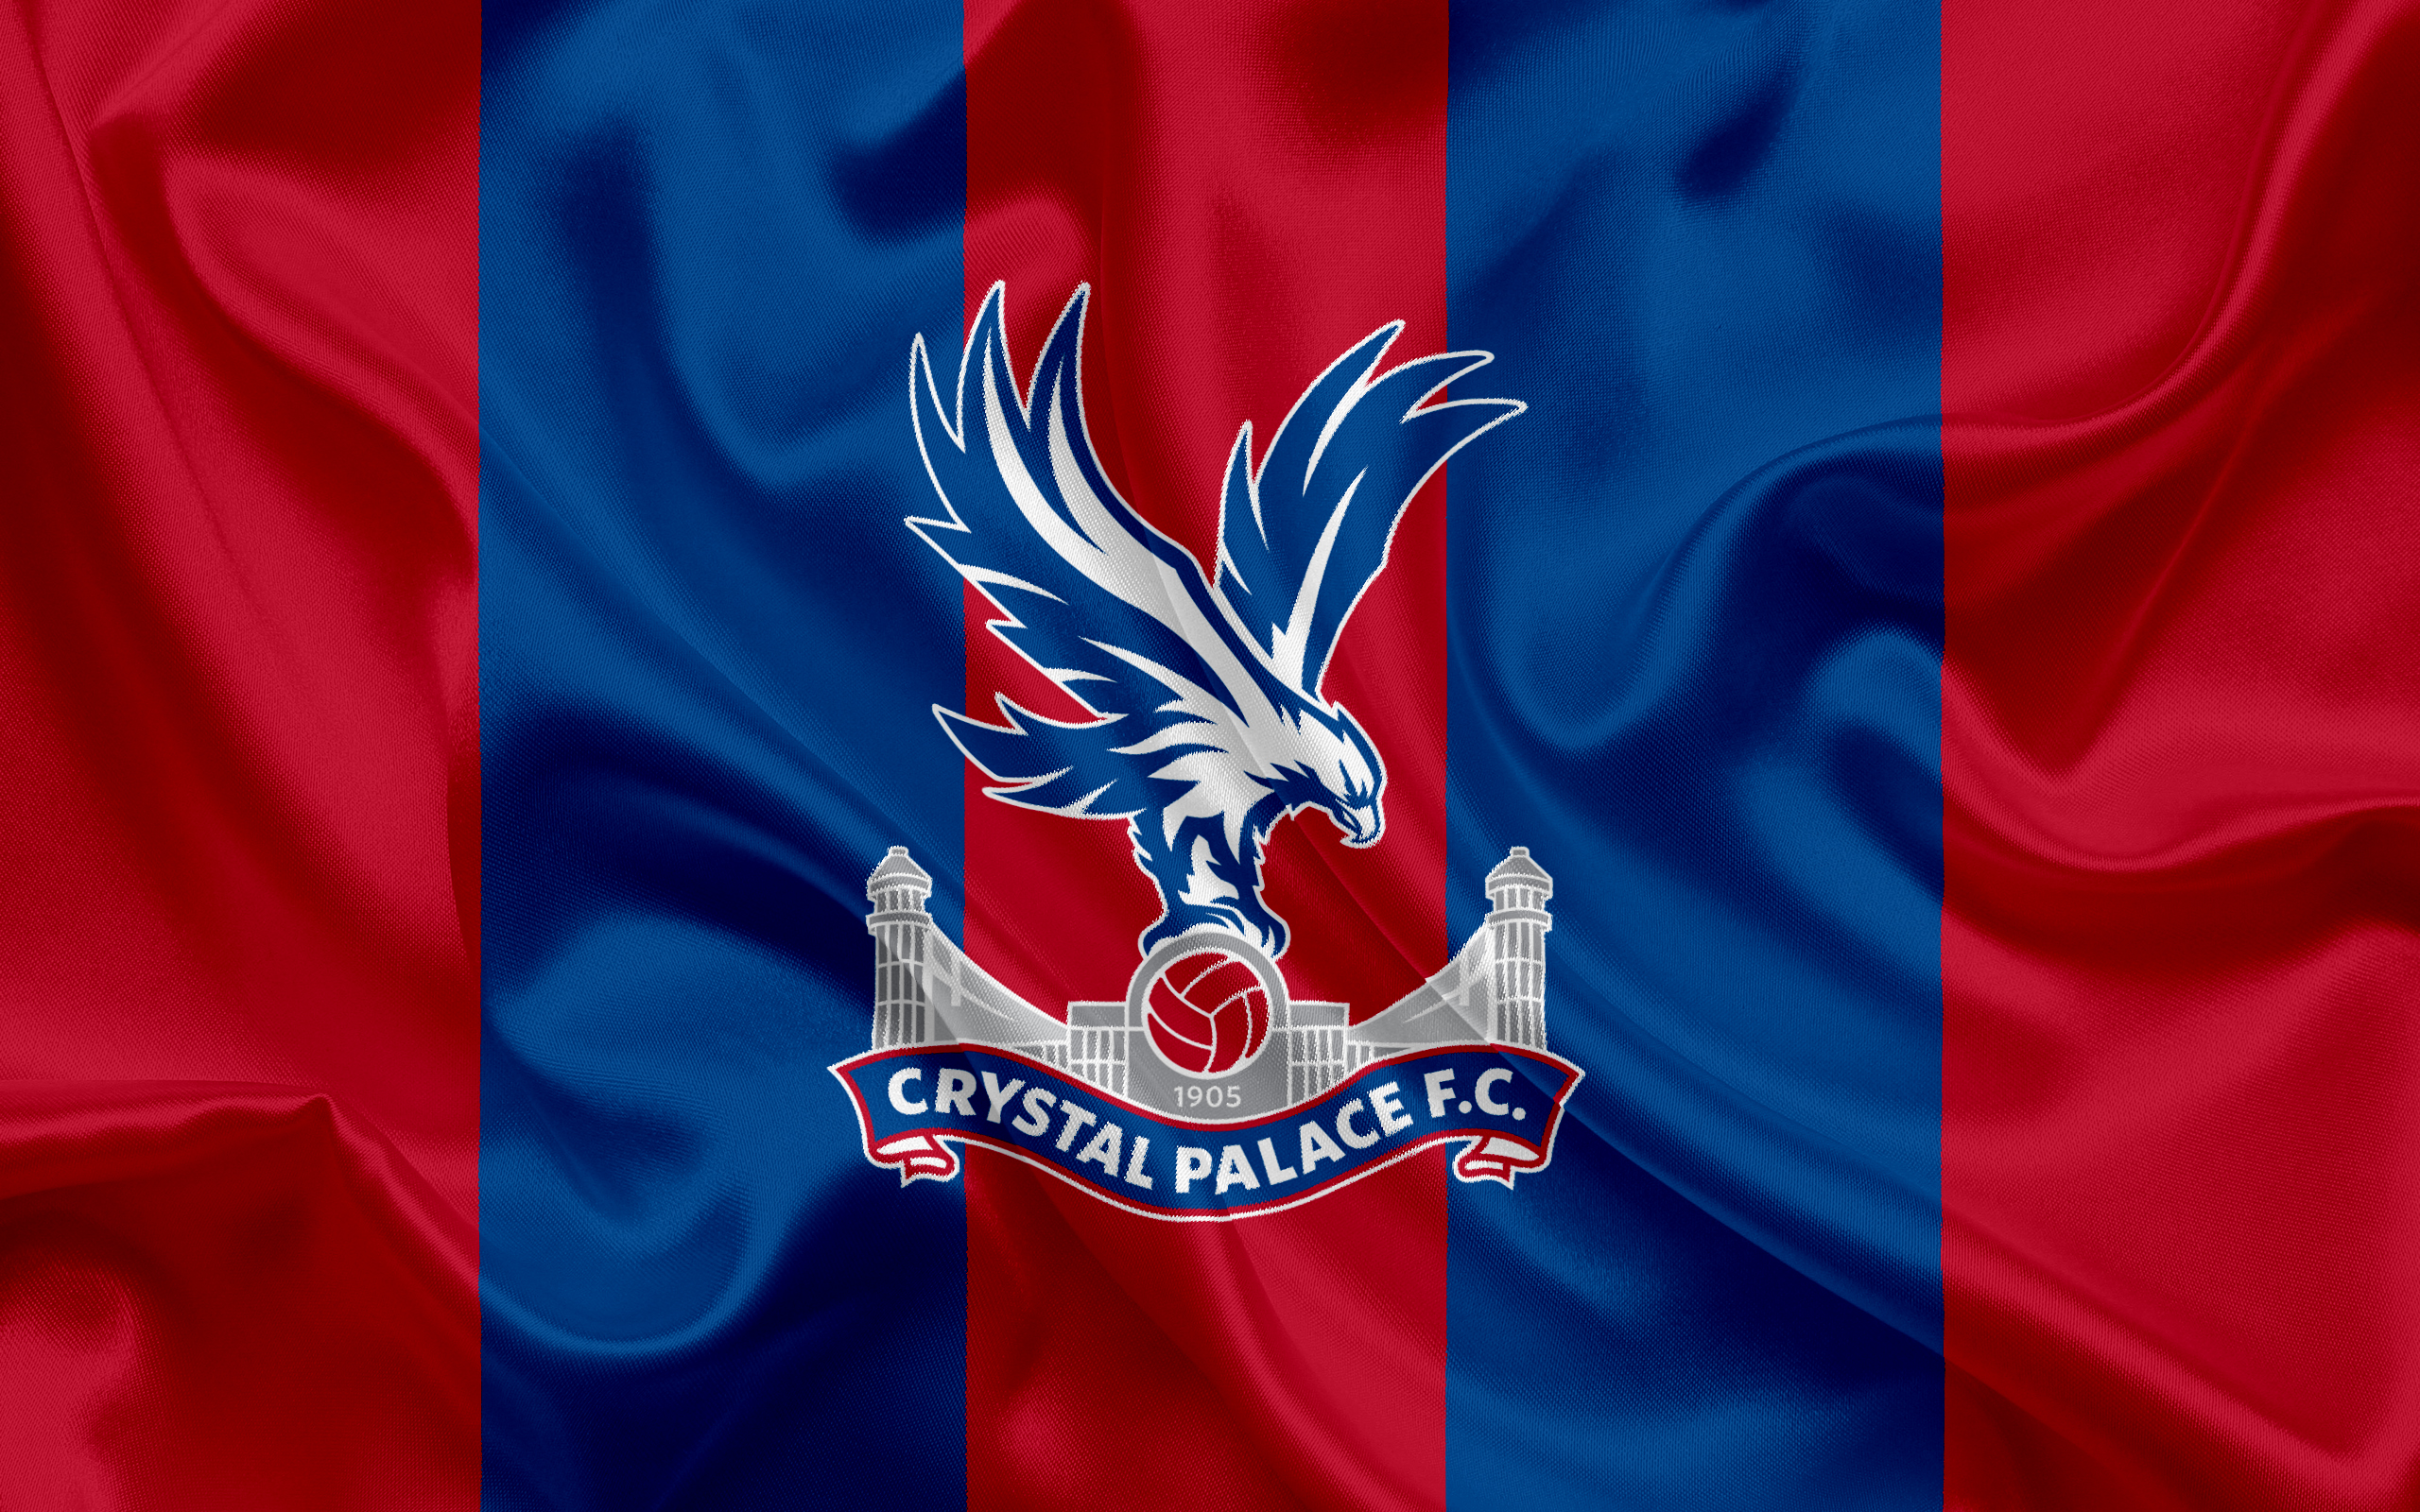 Download wallpaper Crystal Palace FC, Football Club, Premier League, football, London, UK, England, emblem, Crystal Palace logo, English football club for desktop with resolution 2560x1600. High Quality HD picture wallpaper